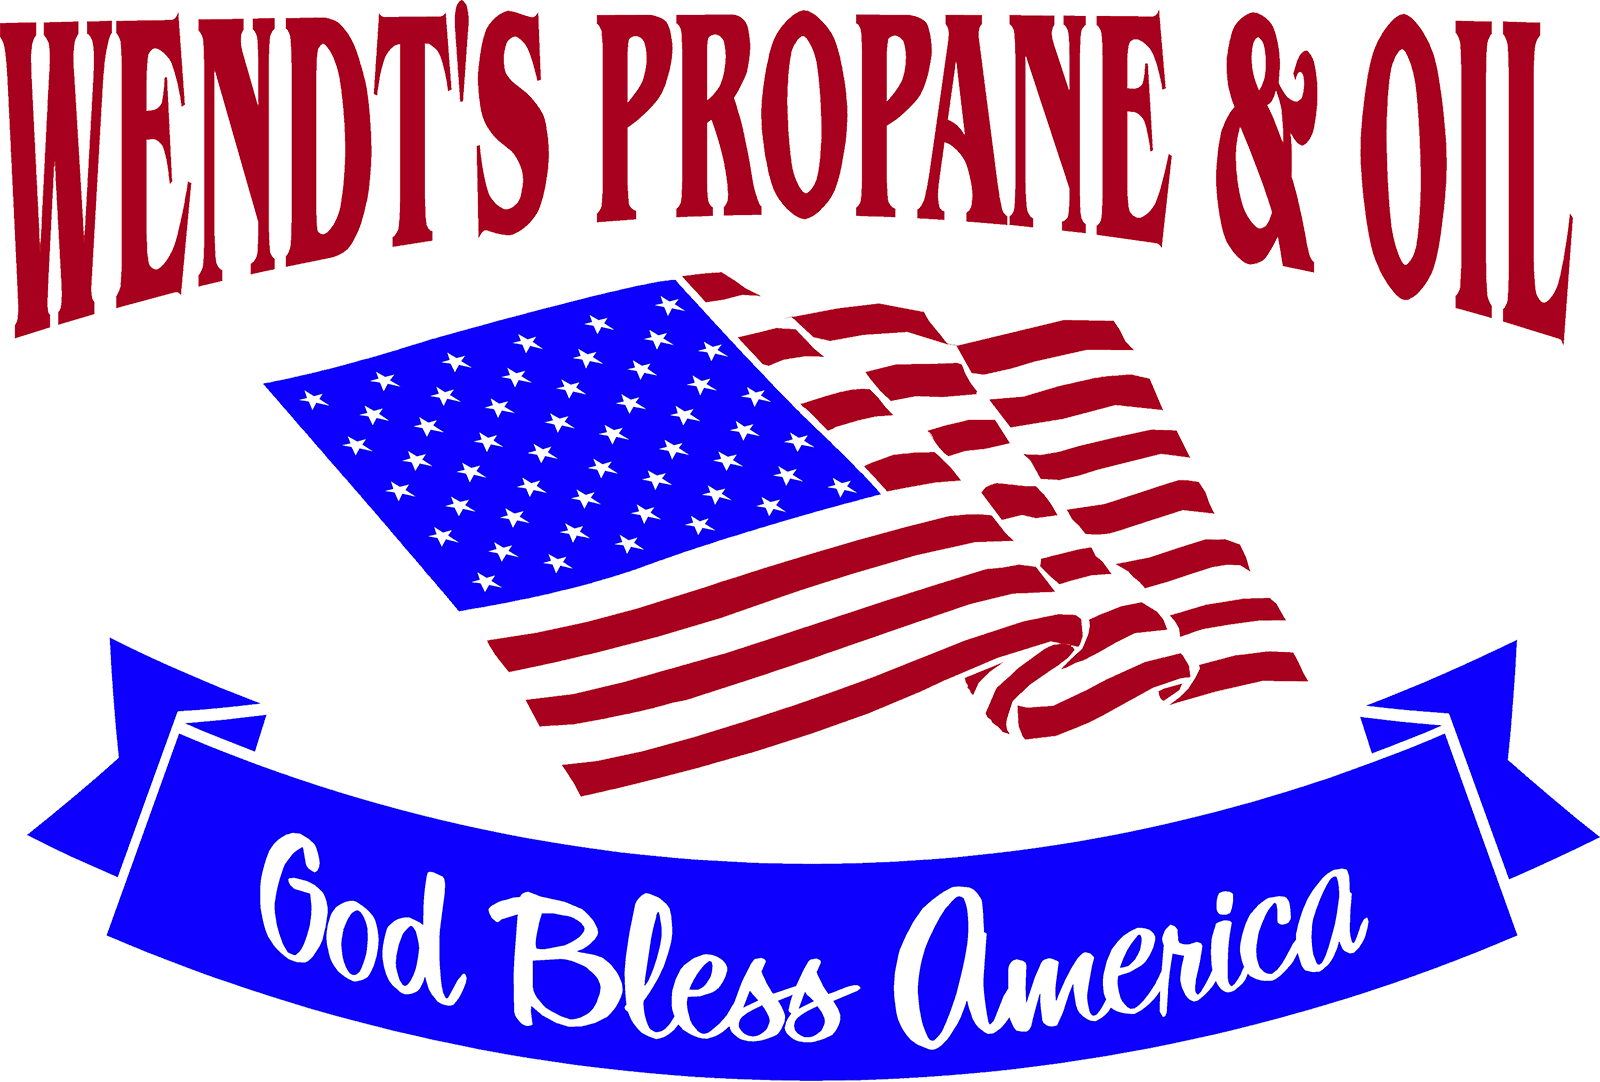 Wendt's Propane and Oil